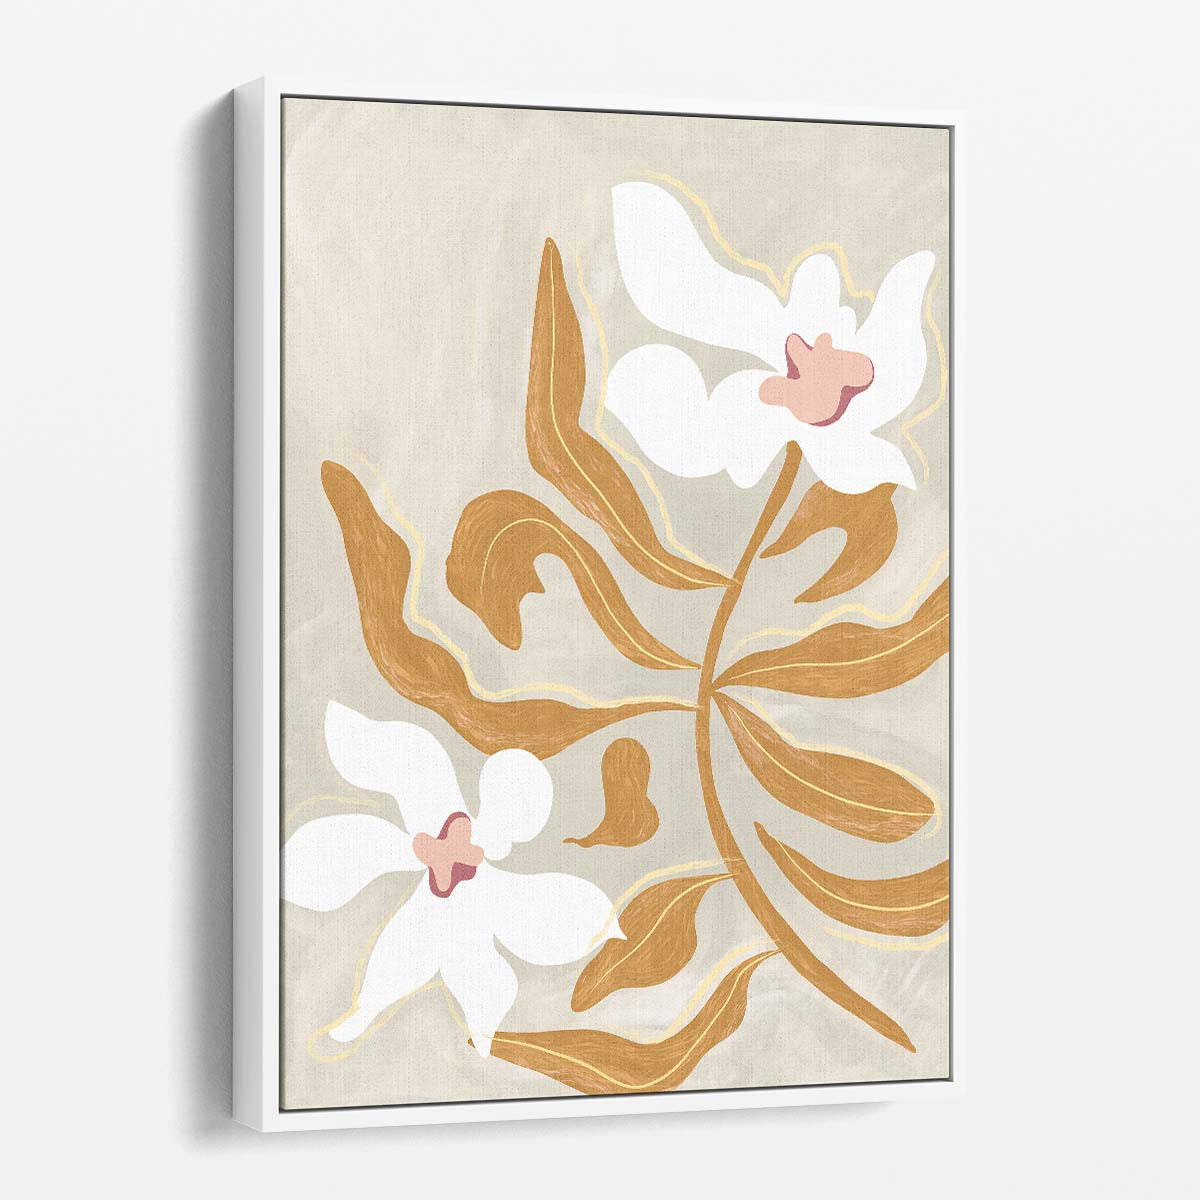 Colorful Abstract Floral Illustration Boho, White Flower Brown Leaves by Luxuriance Designs, made in USA